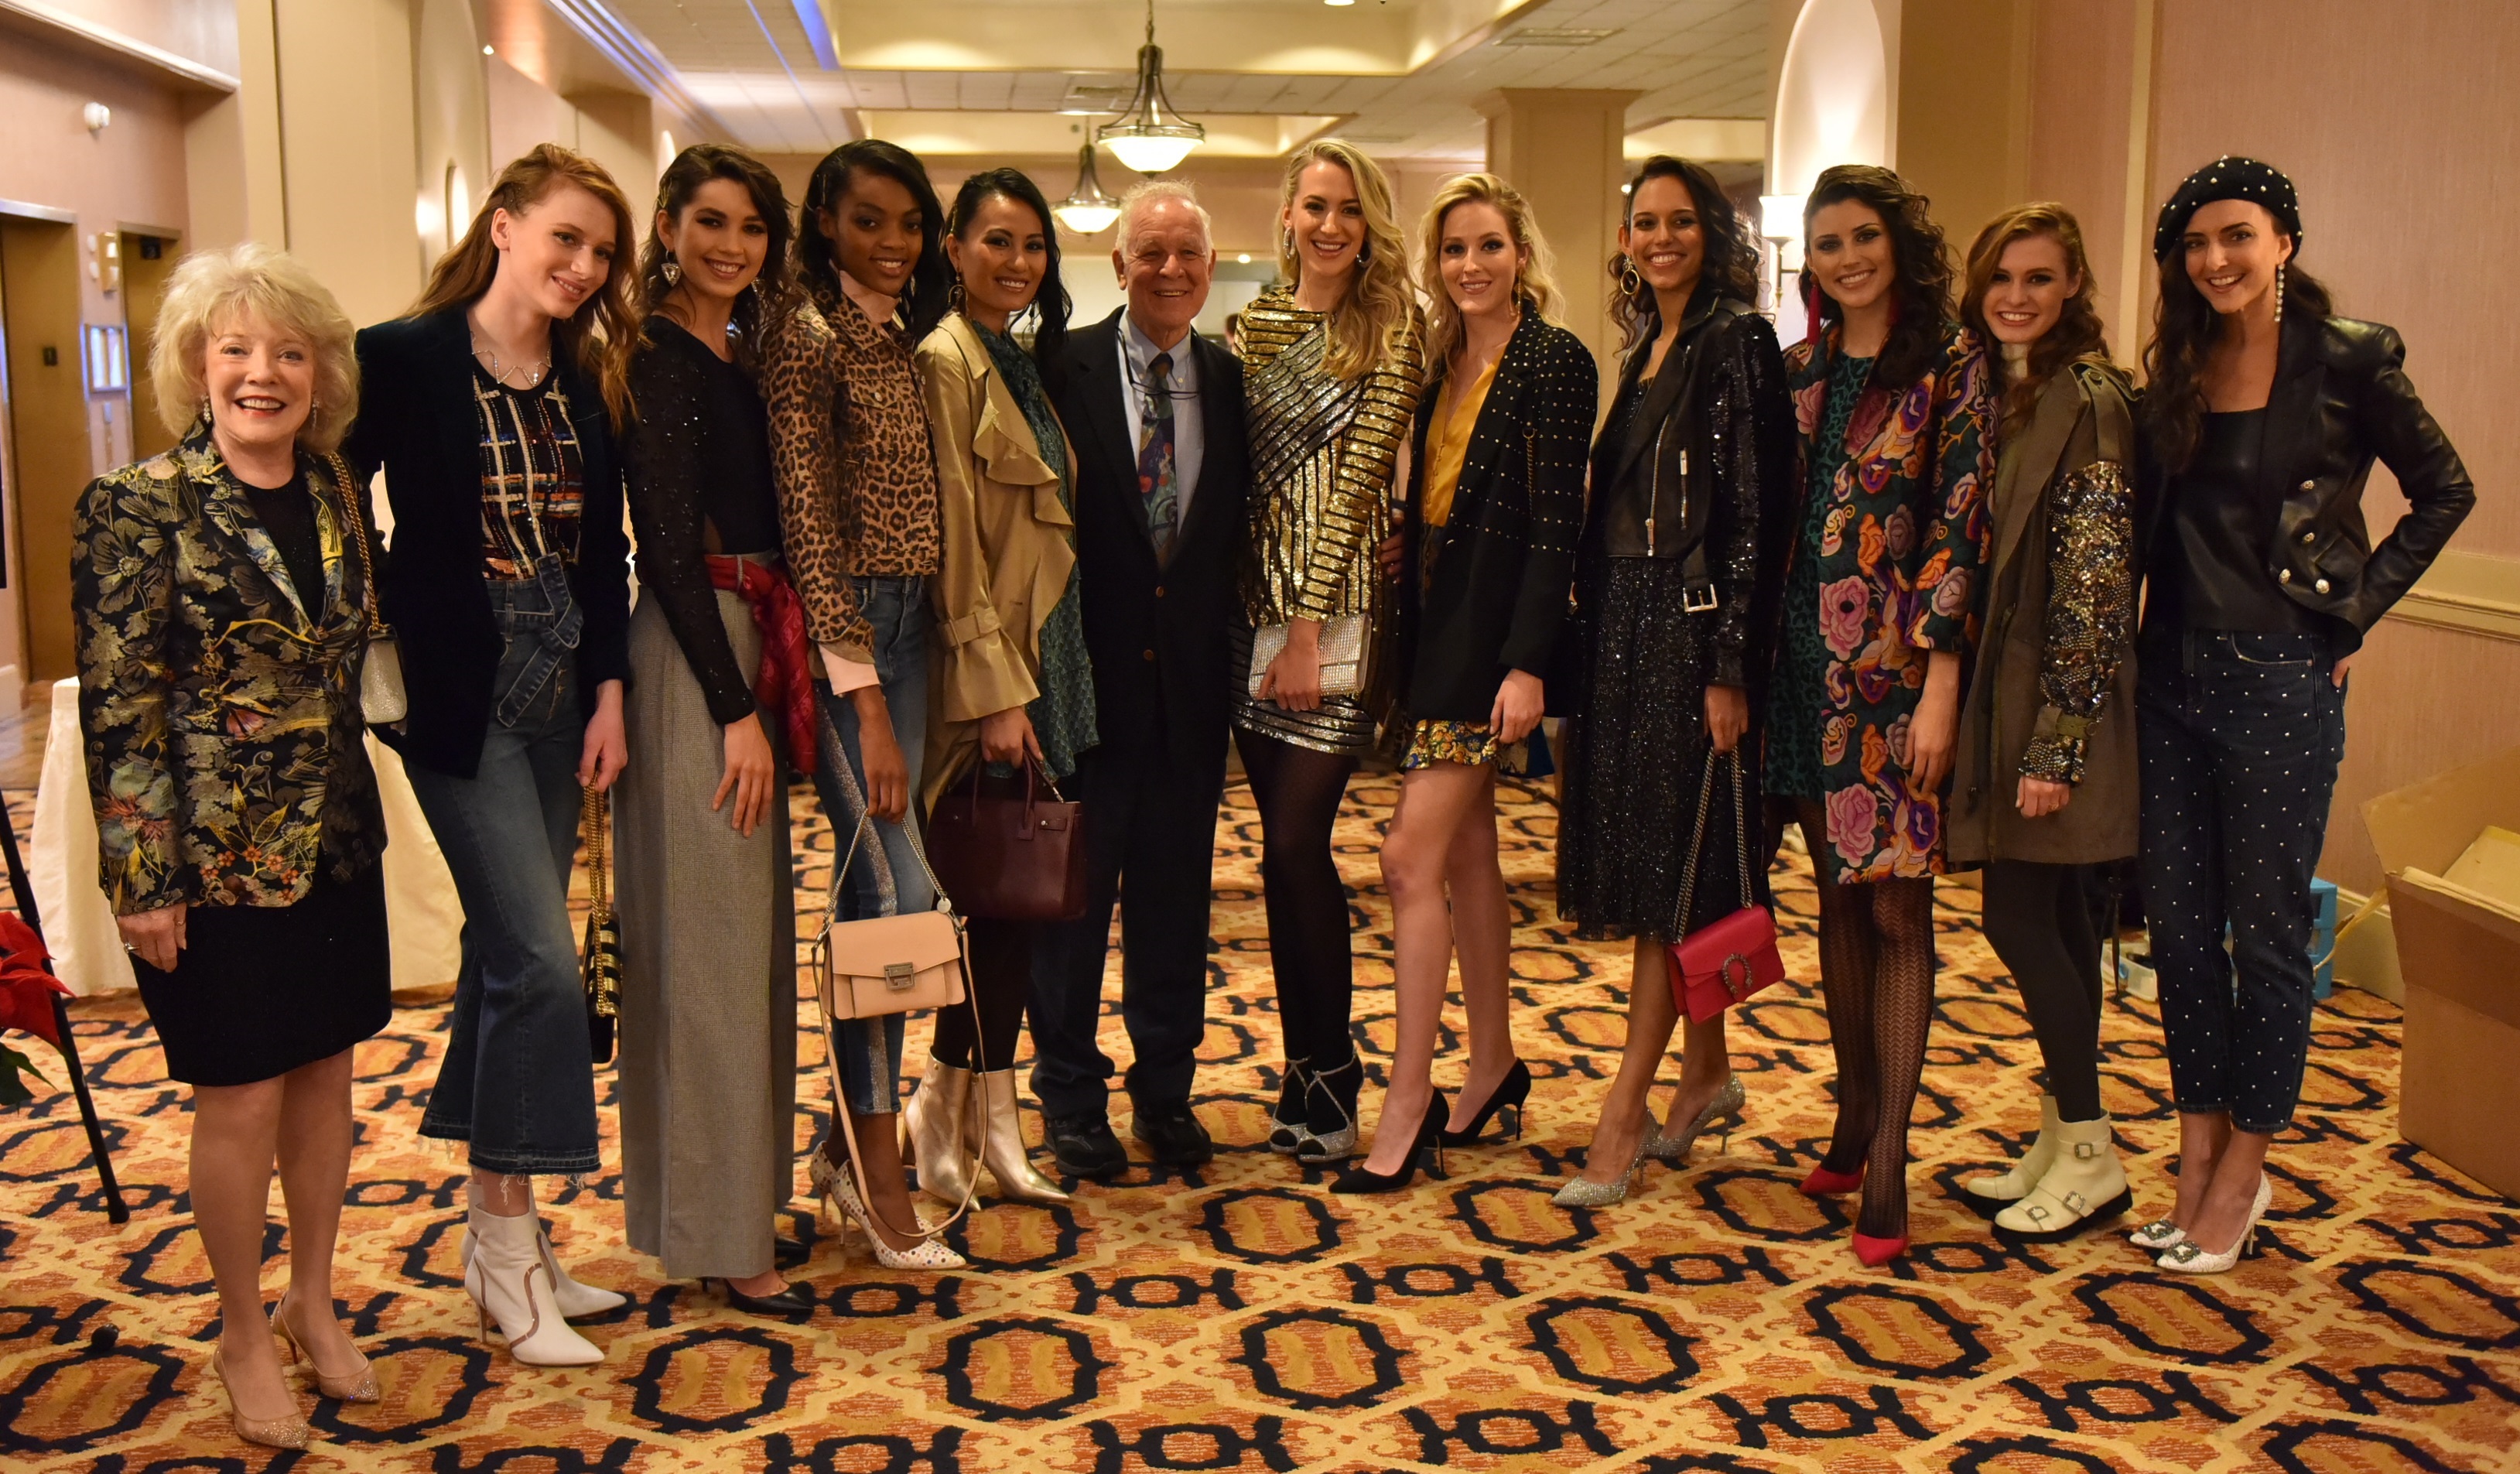 Jeanne and Ed Arnold smile with 10 models at the 2018 Neiman Marcus Runway Show. The models wear a variety of fashions and stand in a row on an ornate carpet.